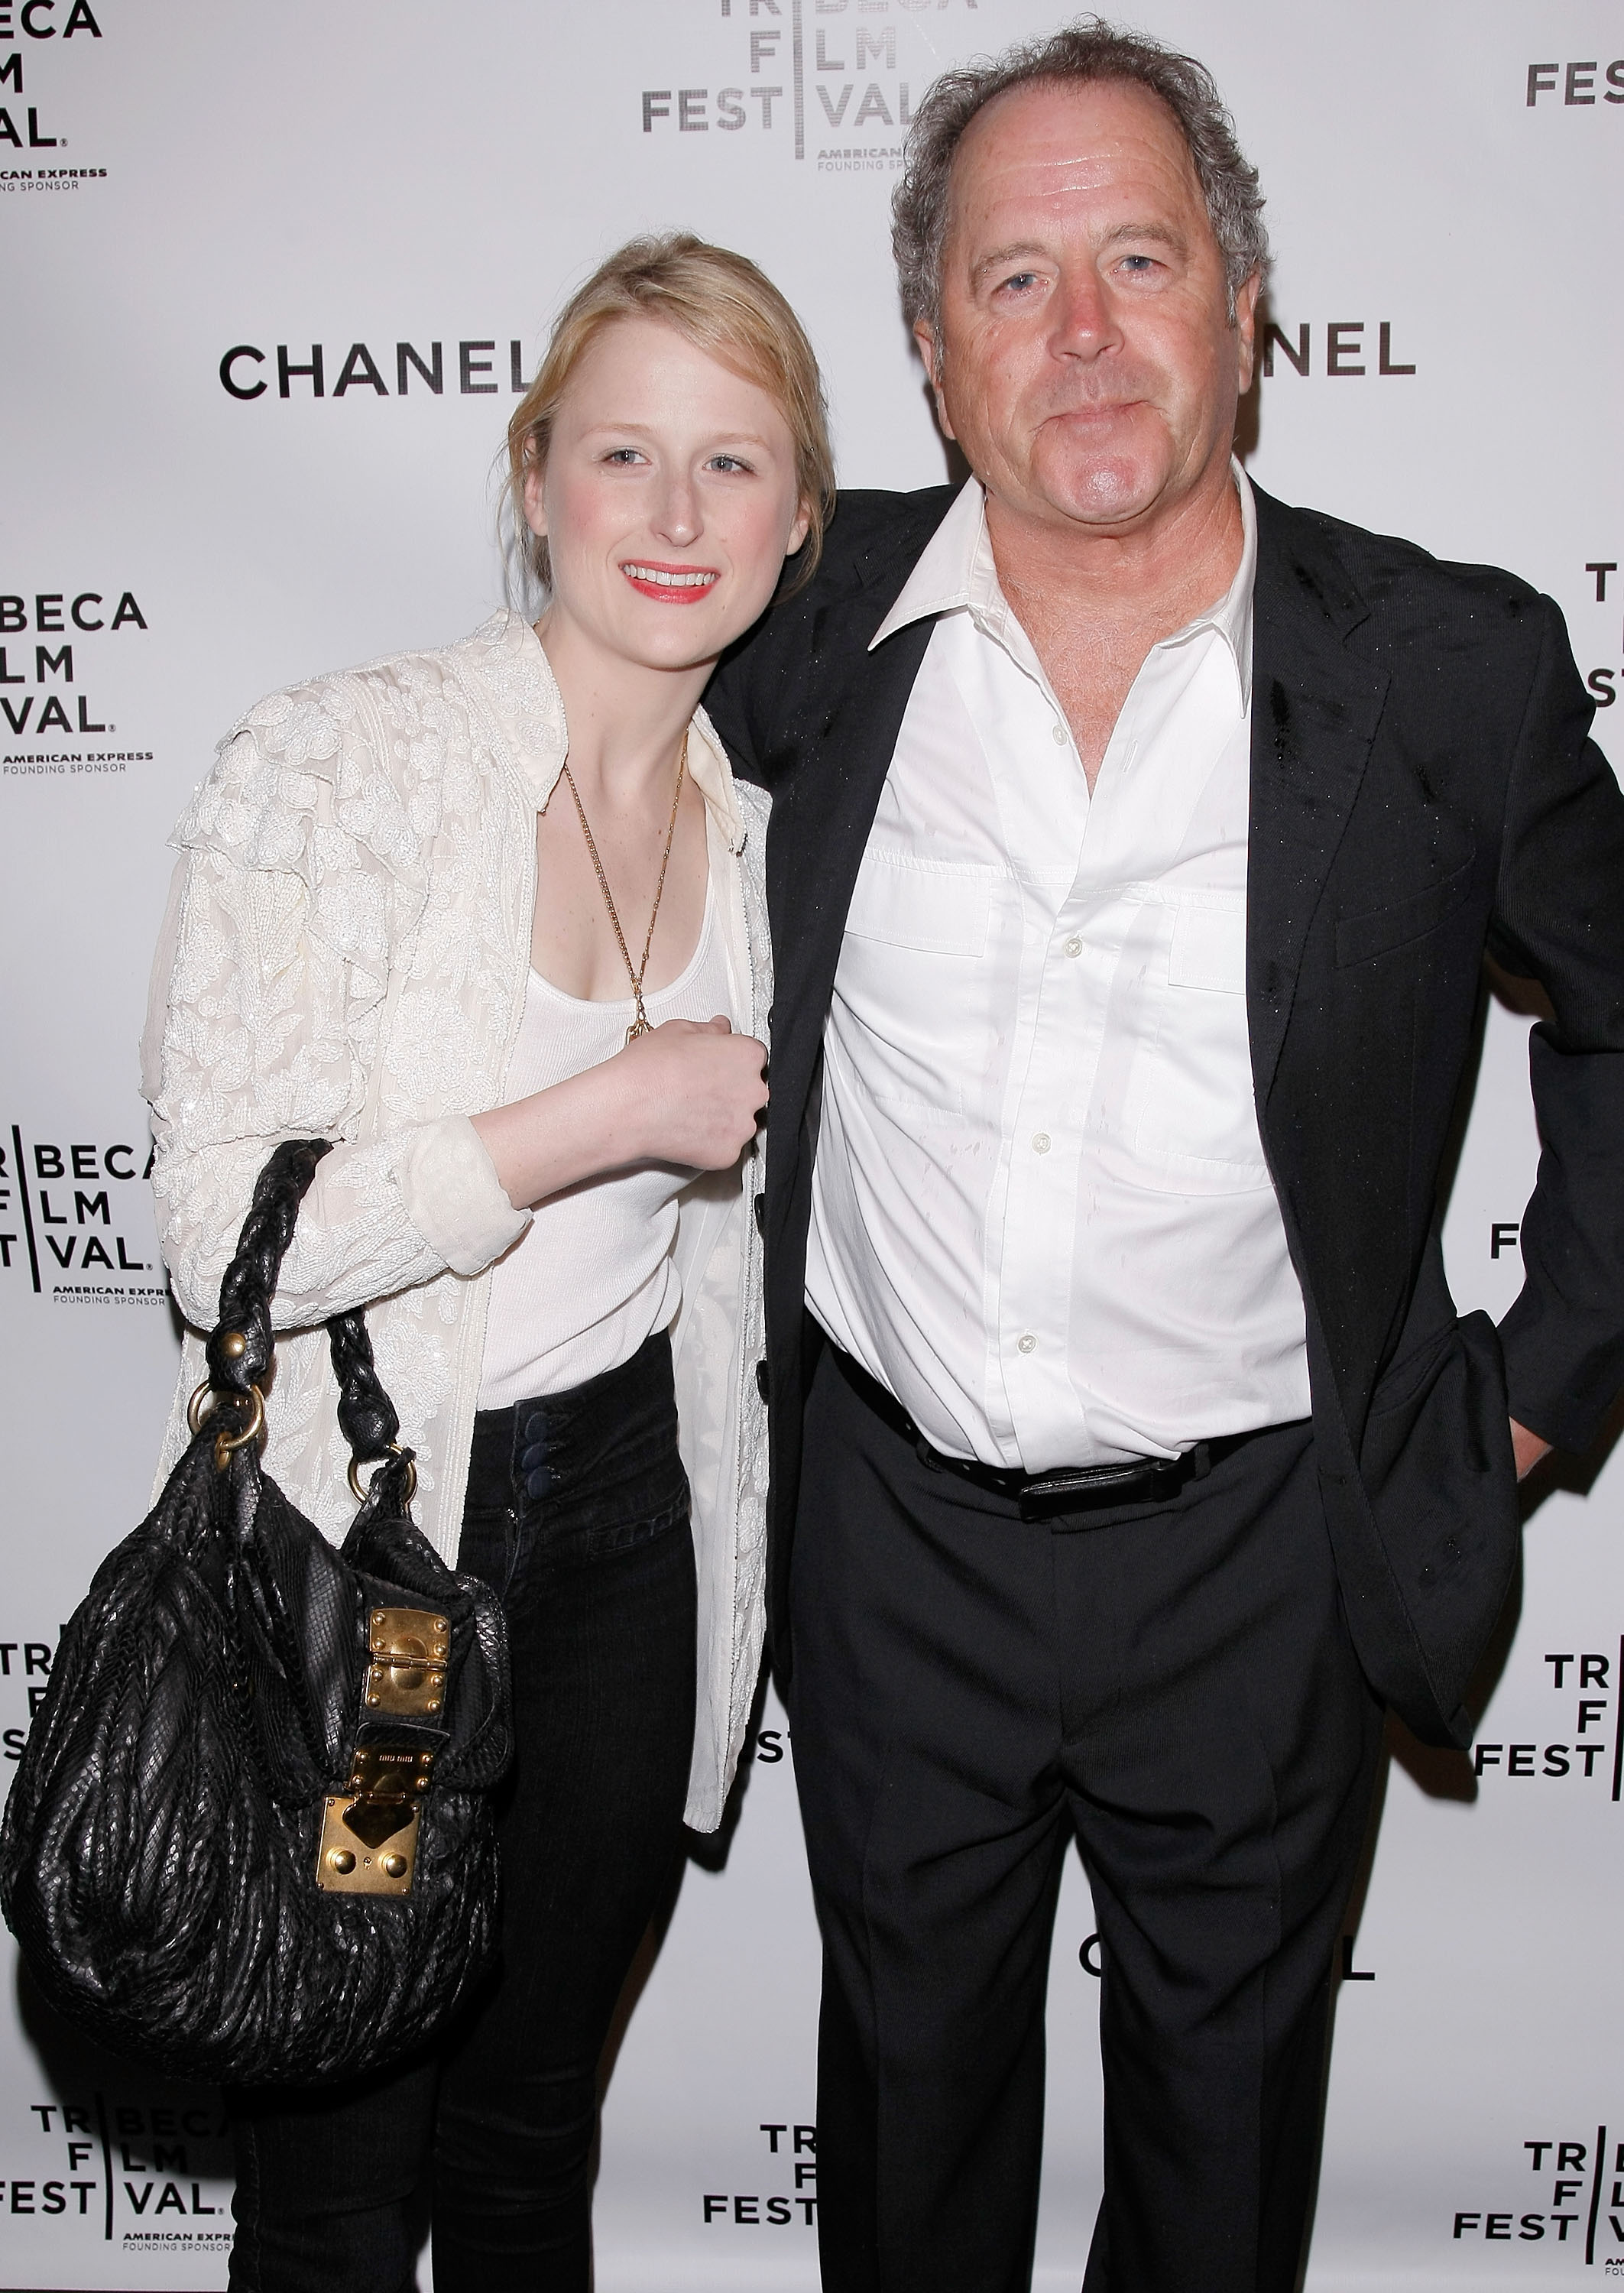 Mamie Gummer and Don Gummer attend the 3rd Annual Chanel Dinner Party Honoring Tribeca Film Festival Artist in New York City, on April 28, 2008. | Source: Getty Images